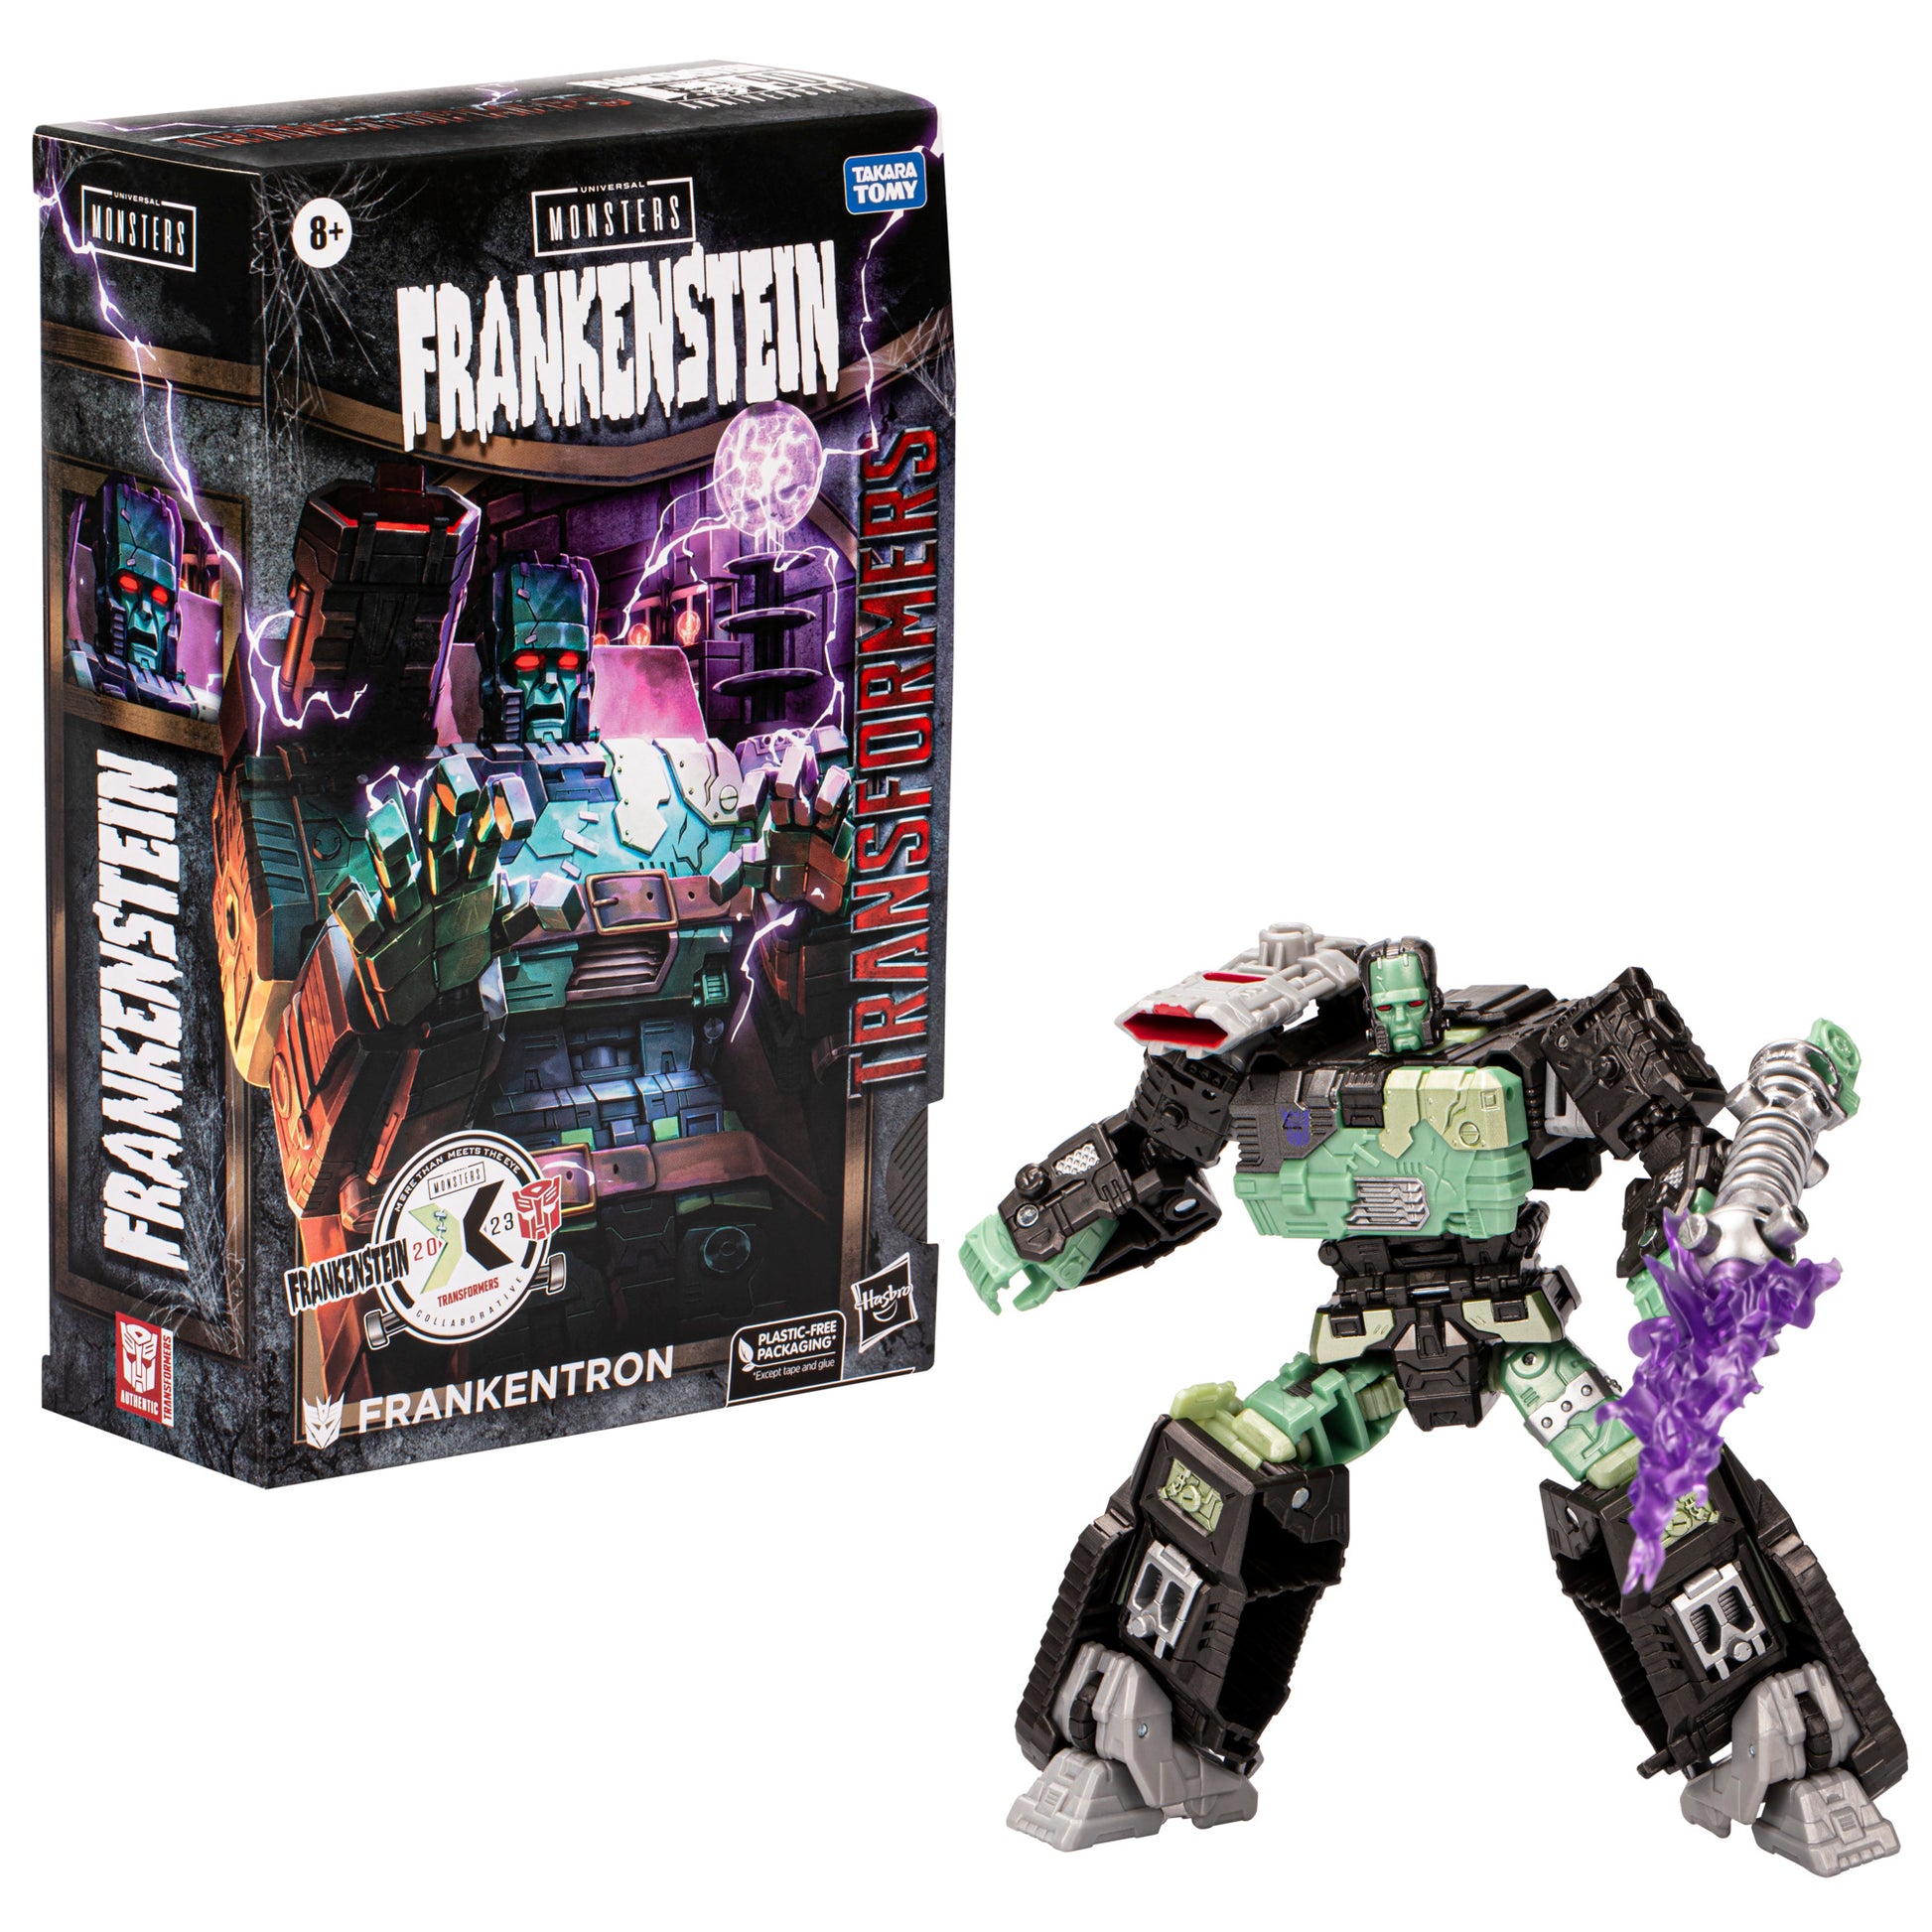 Transformers Collaborative Universal Monsters Frankenstein x Transformers Toy Frankentron, Transformers Action Figure For Boys And Girls Ages 8+ - Heretoserveyou